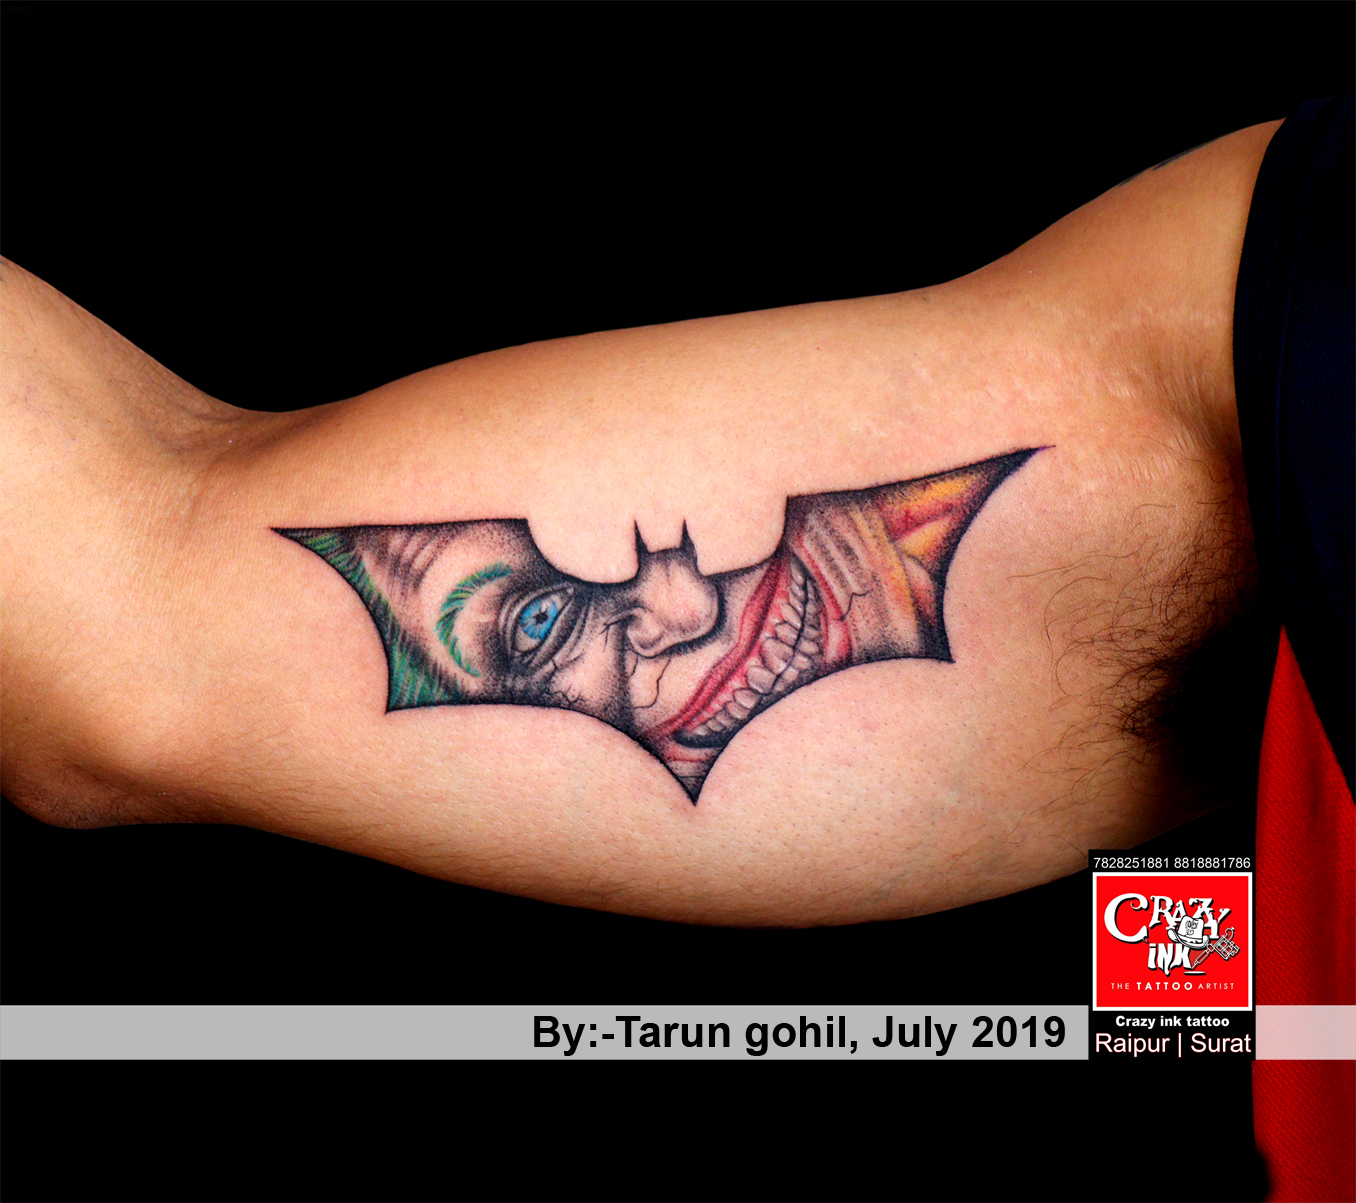 Tattoo uploaded by Courtni Laing  Got this done recently and I absolutely  LOVE it batman batmantattoo batmanjoker Joker jokertattoo DCTattoos  dccomics  Tattoodo